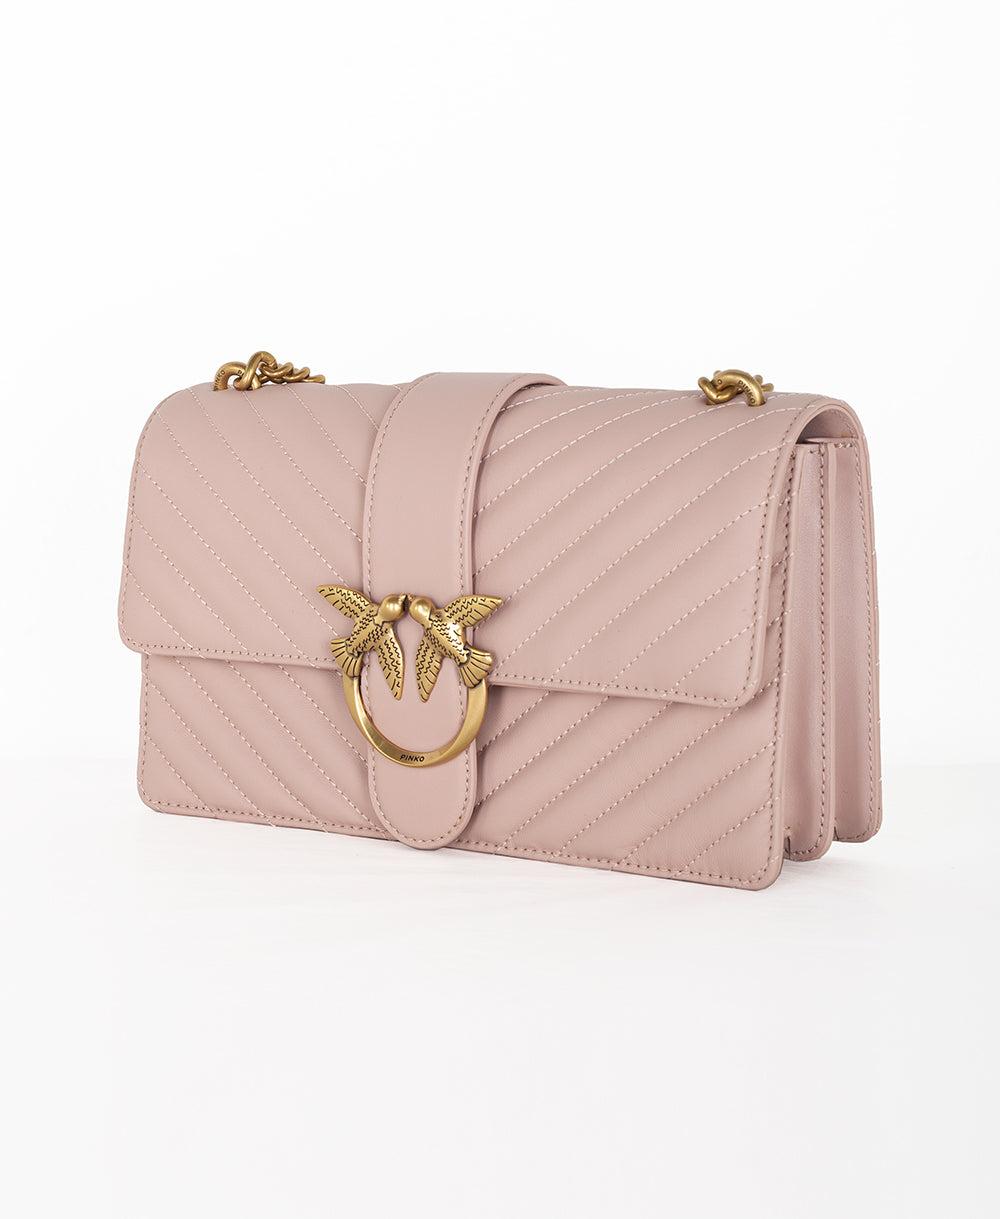 Pinko Leather O Classic Love Bag Icon V Quilt 1p22jp Y7sq in Pink | Lyst